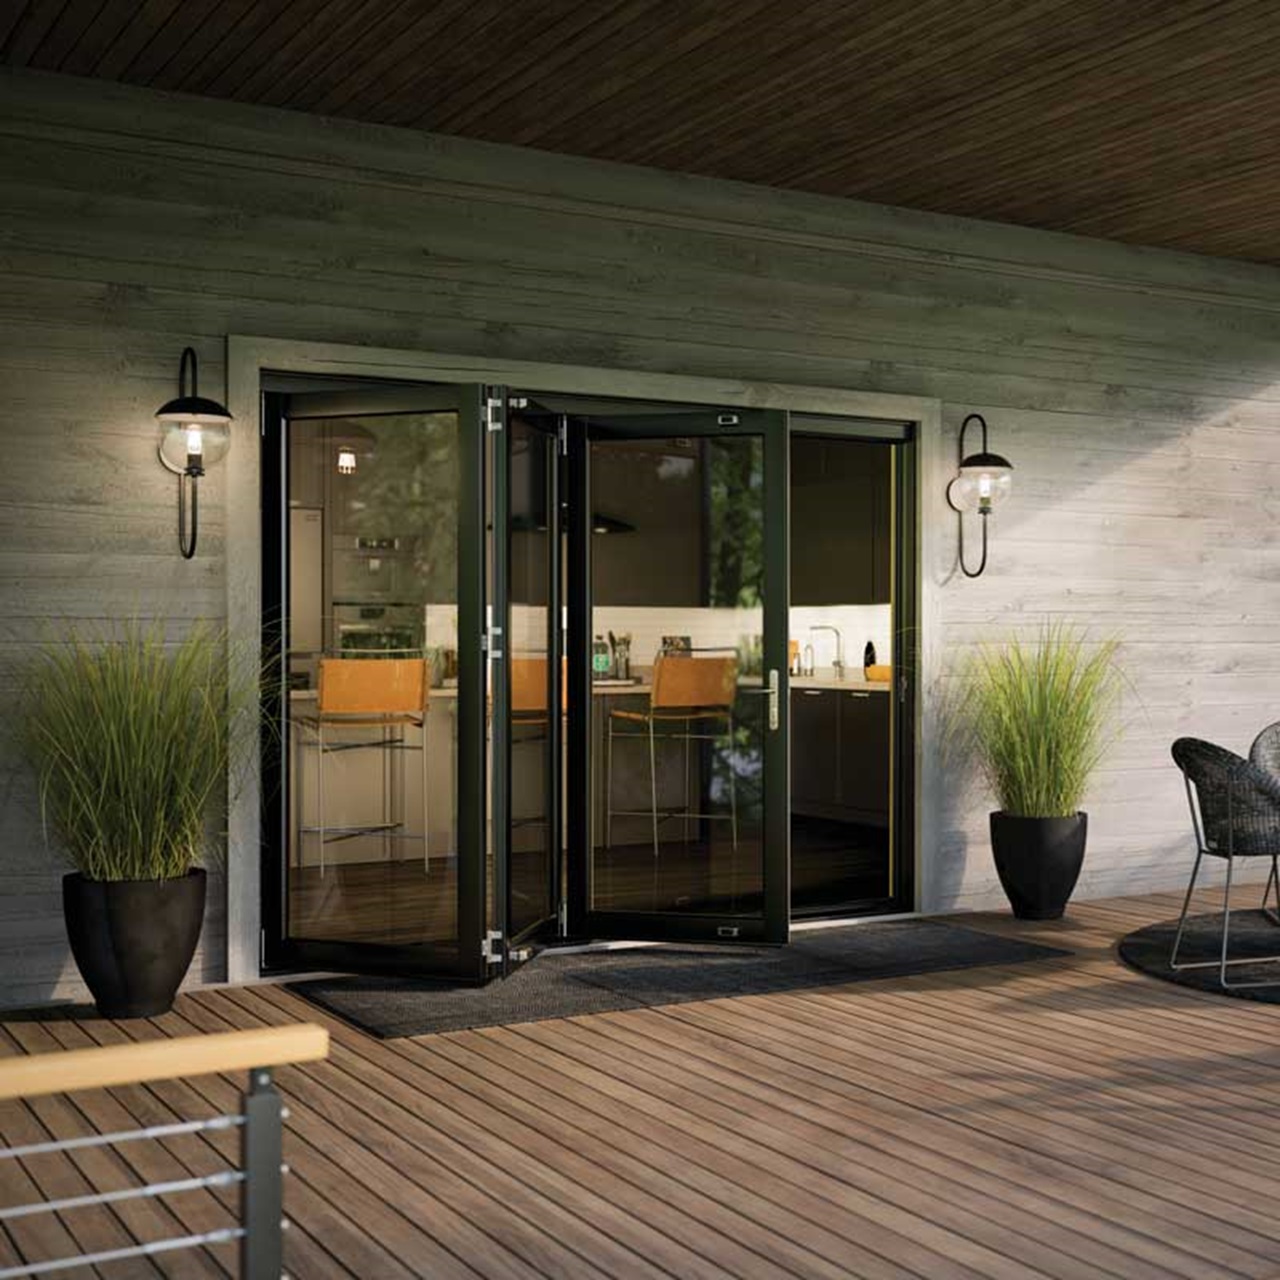 Exterior wood patio with table and chairs with black elevate bi fold door